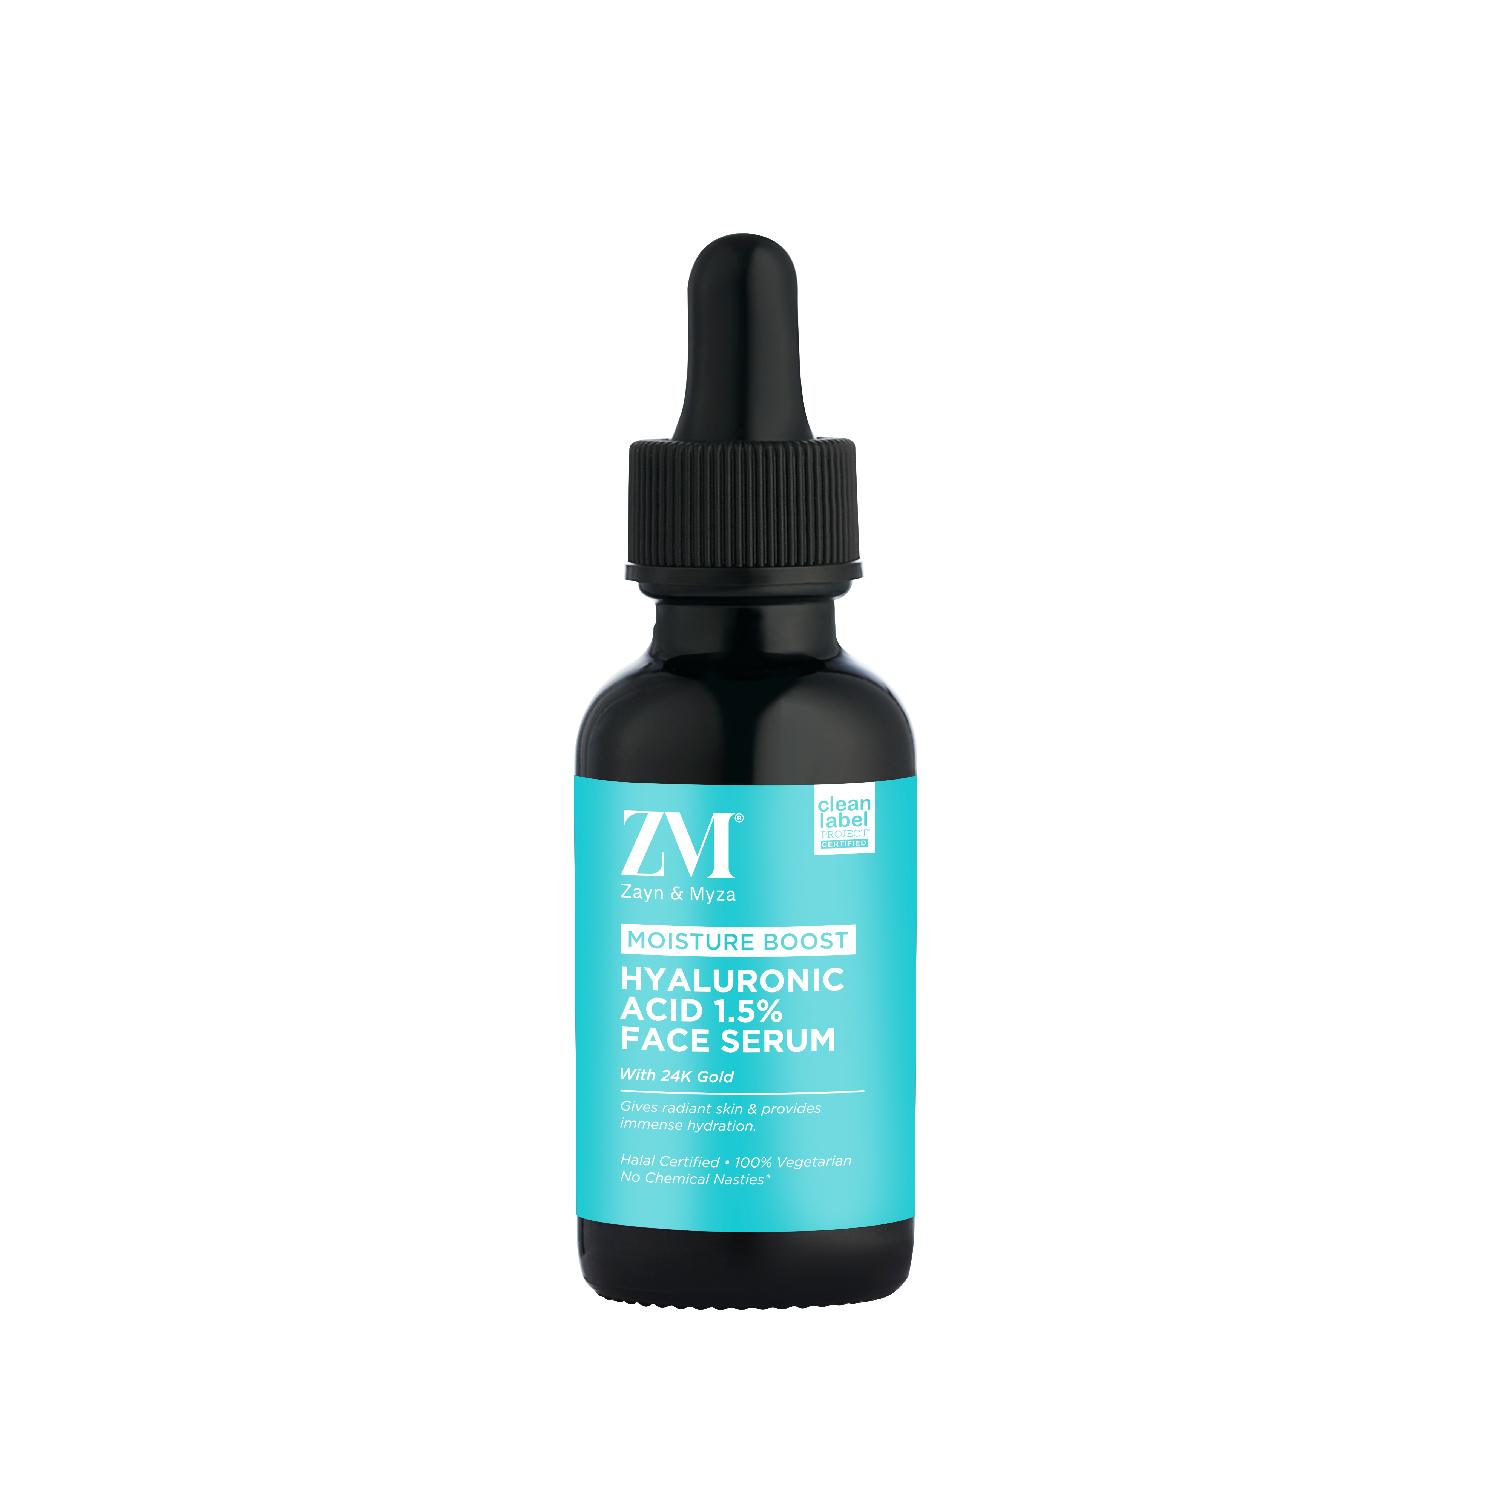 Hyaluronic Acid 1.5% Face Serum with 24K Gold